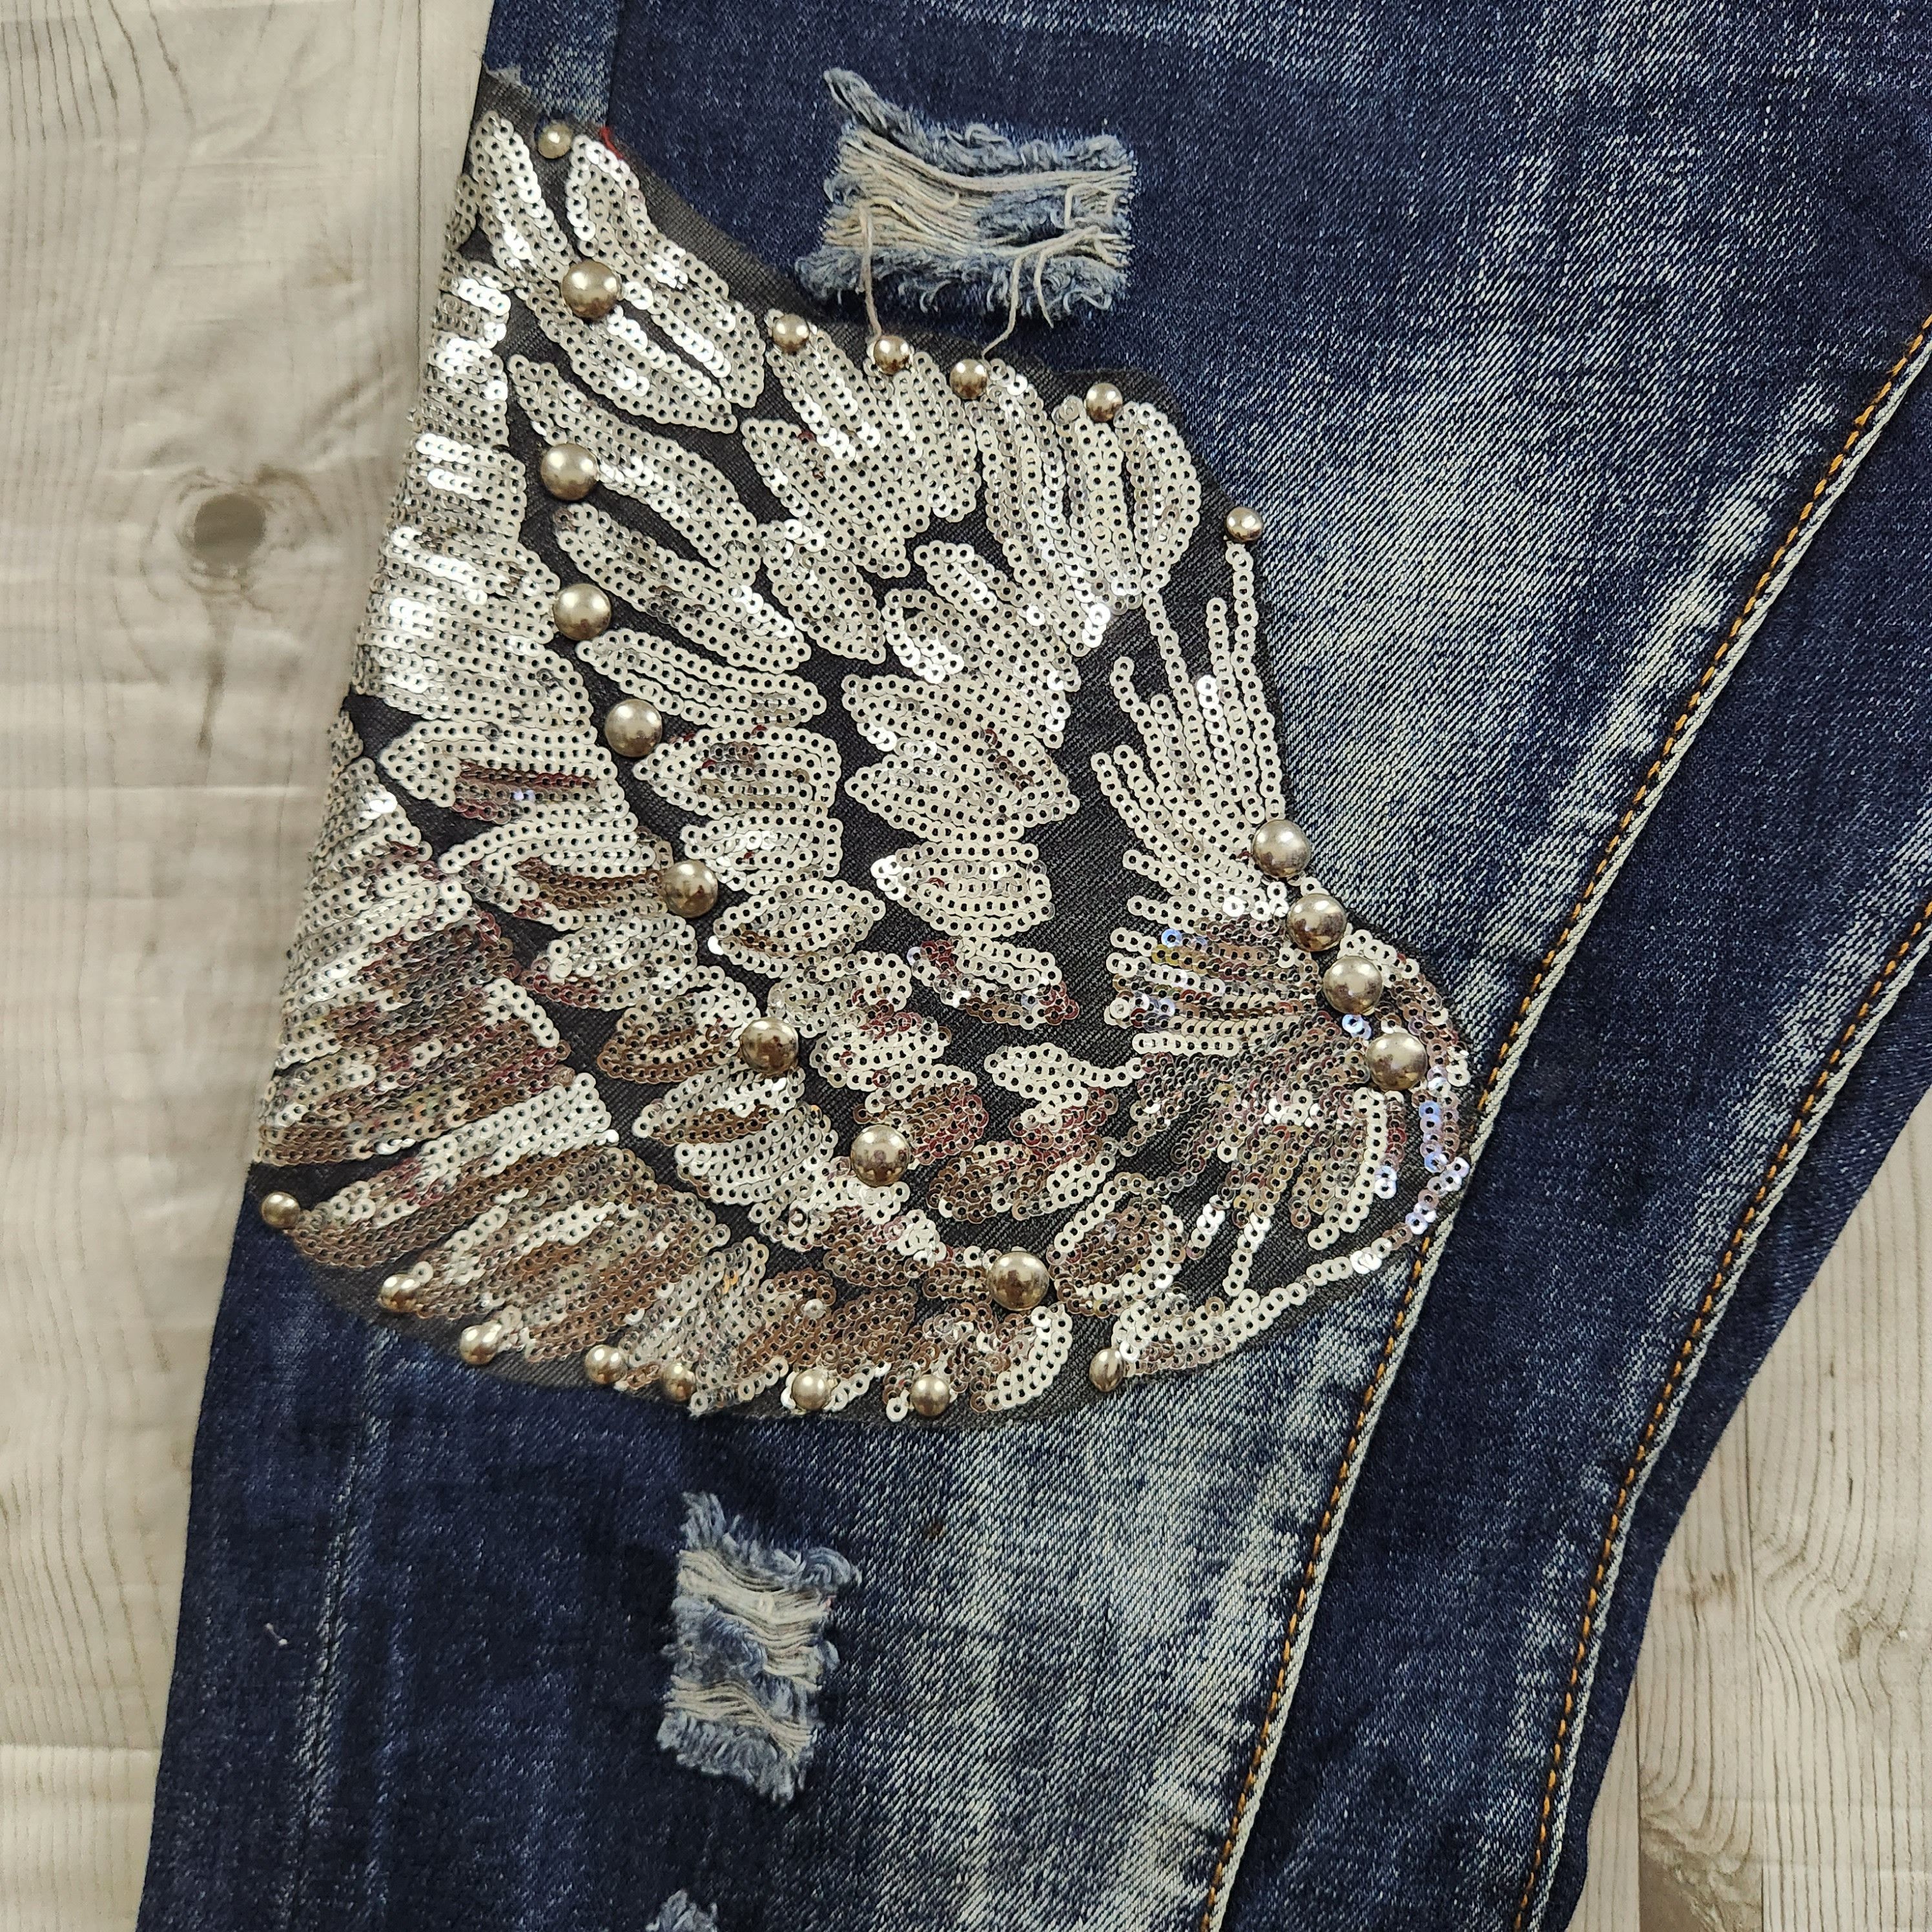 Japanese Brand - Japan Tokyo Denim Double Wings Patches - 12